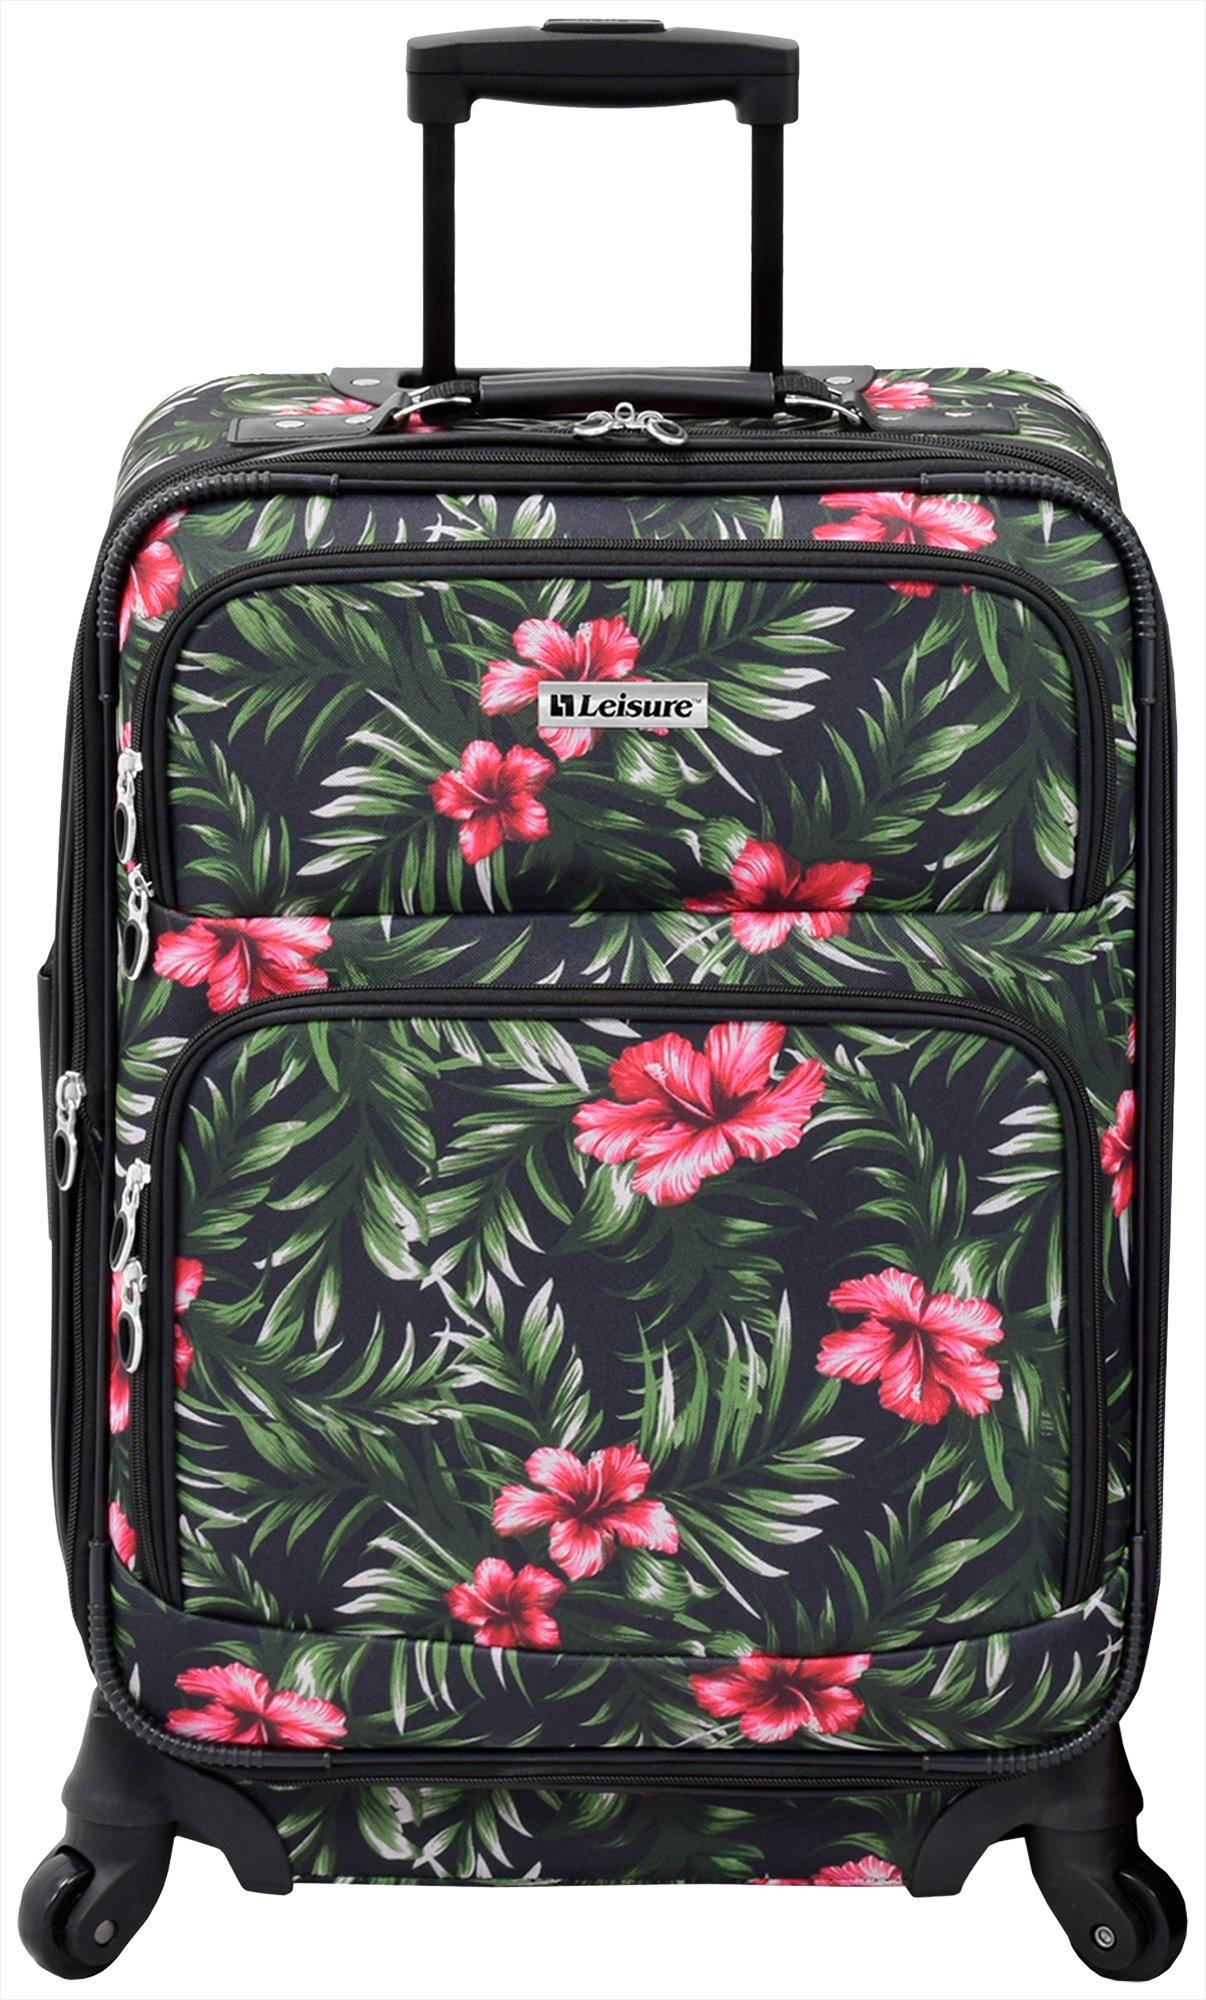 Leisure Luggage 21'' Lafayette Hibiscus Palm Spinner Luggage